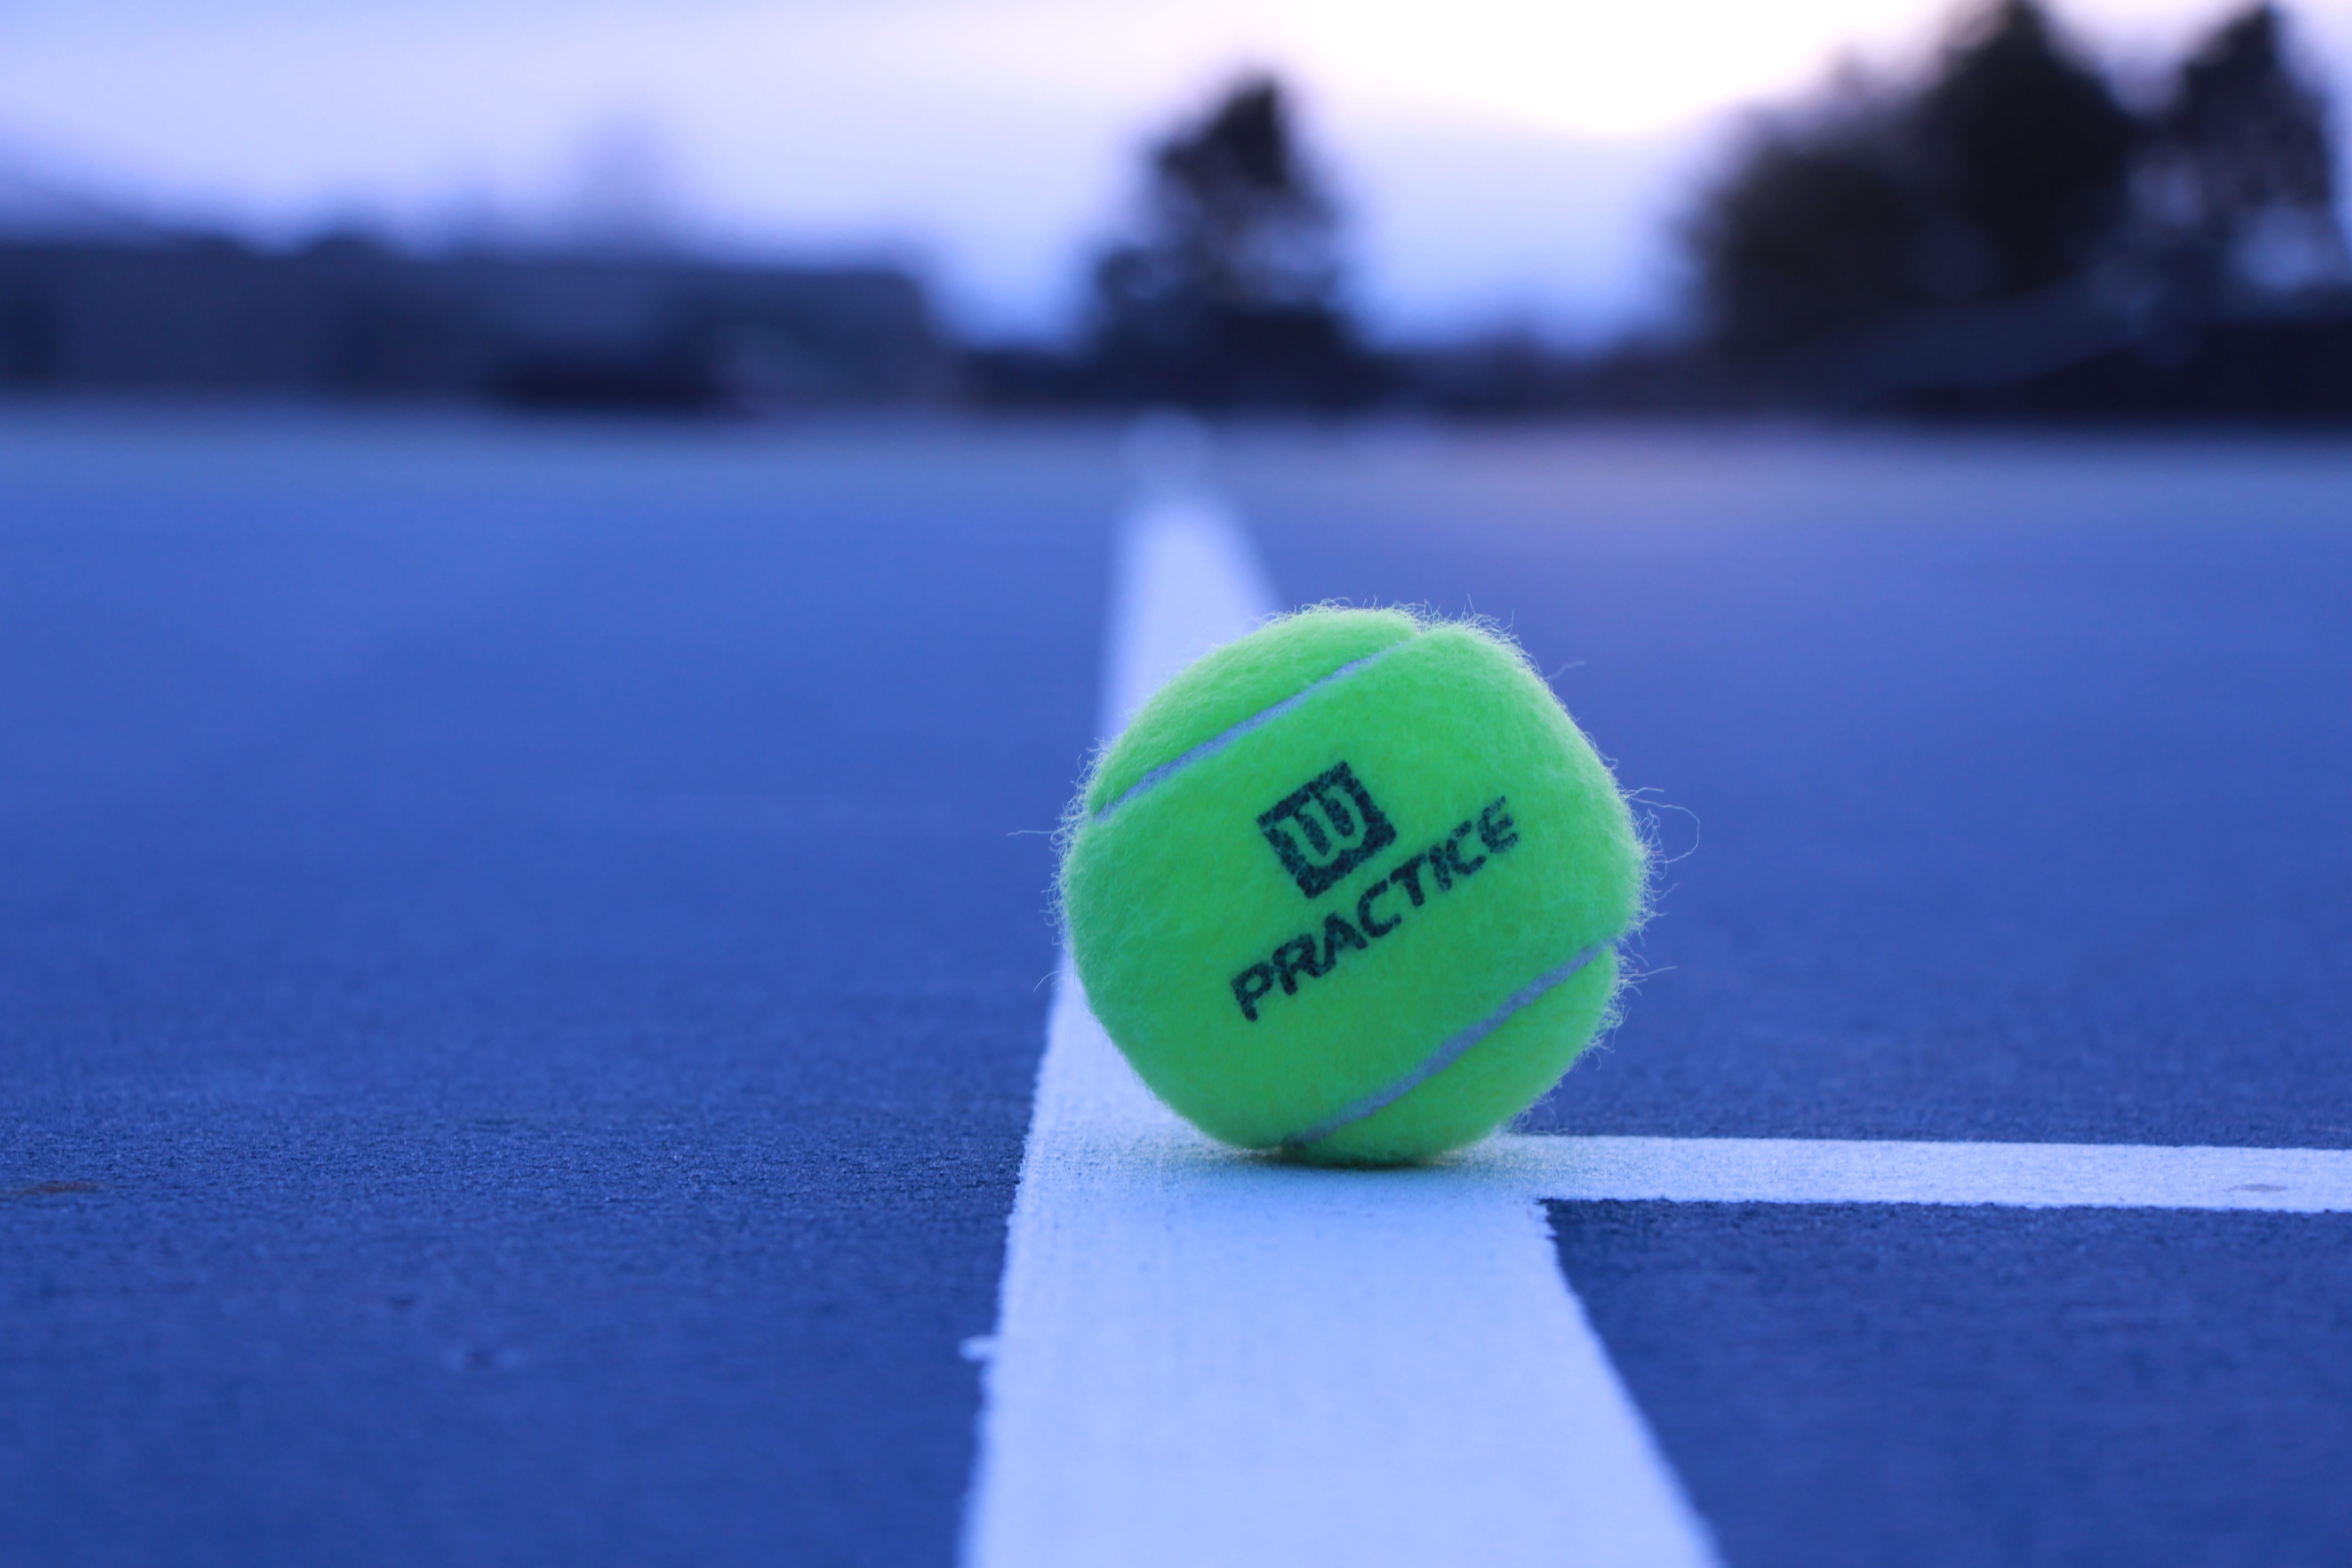 Catholic School Suggested Retired Tennis Coach was Terminated